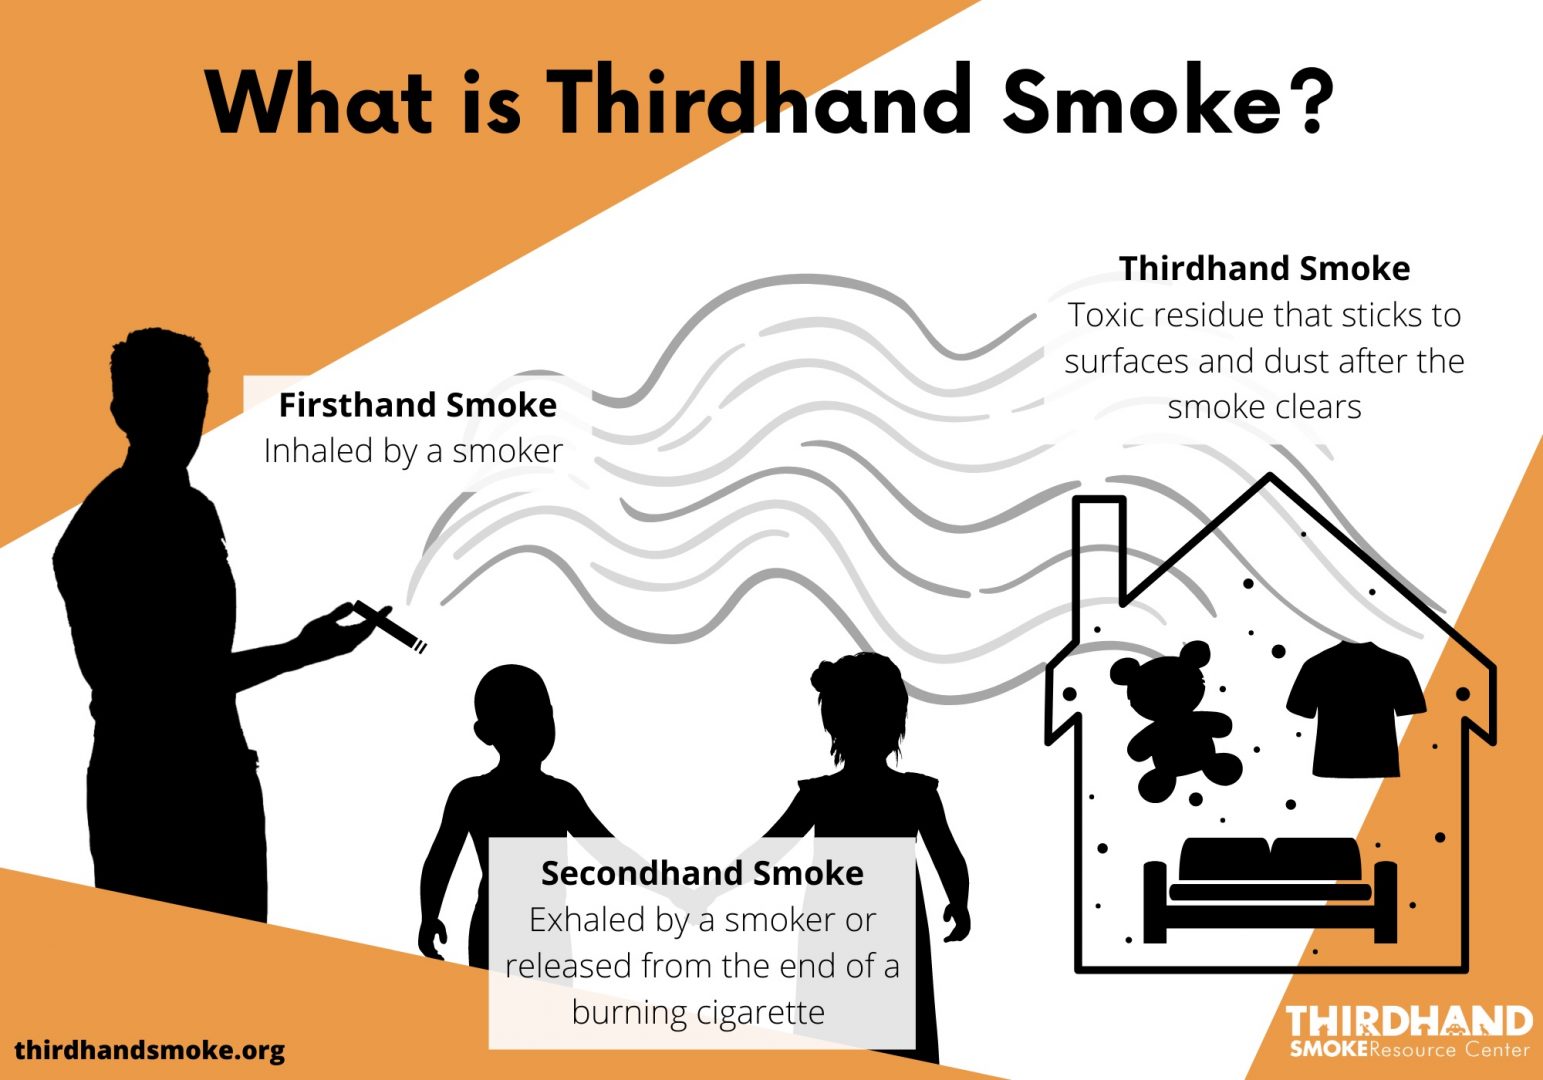 Orange, black and white illustration comparing thirdhand smoke with first and secondhand smoke